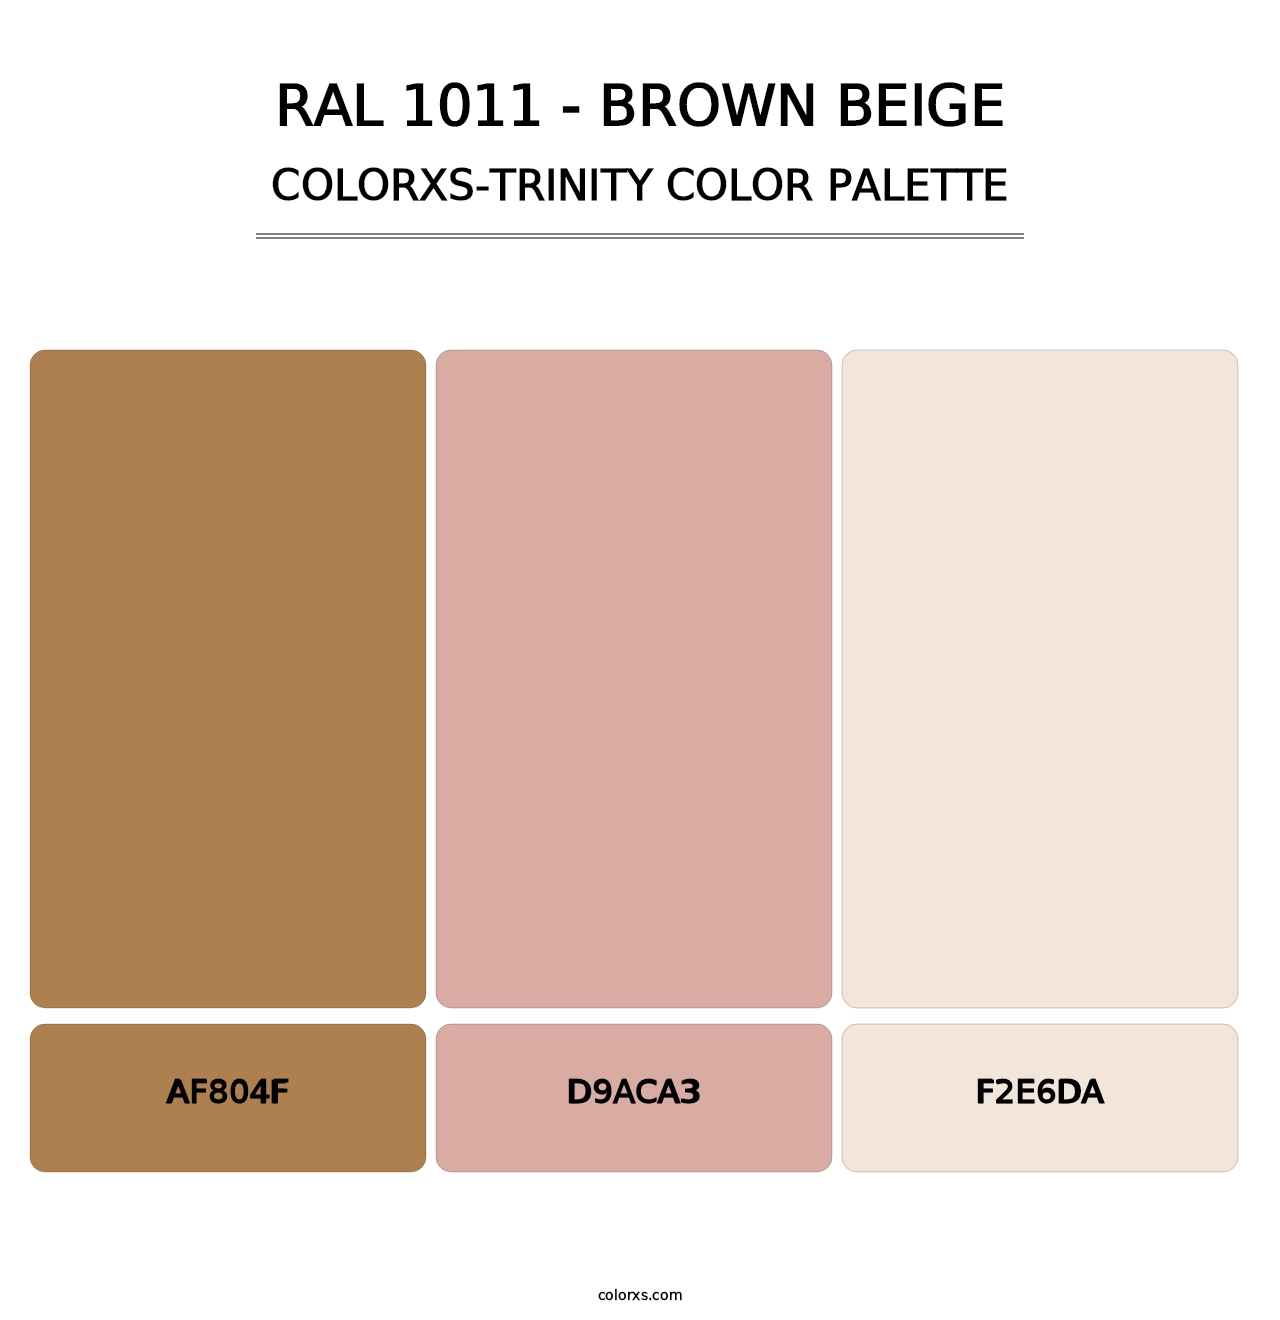 RAL 1011 - Brown Beige - Colorxs Trinity Palette